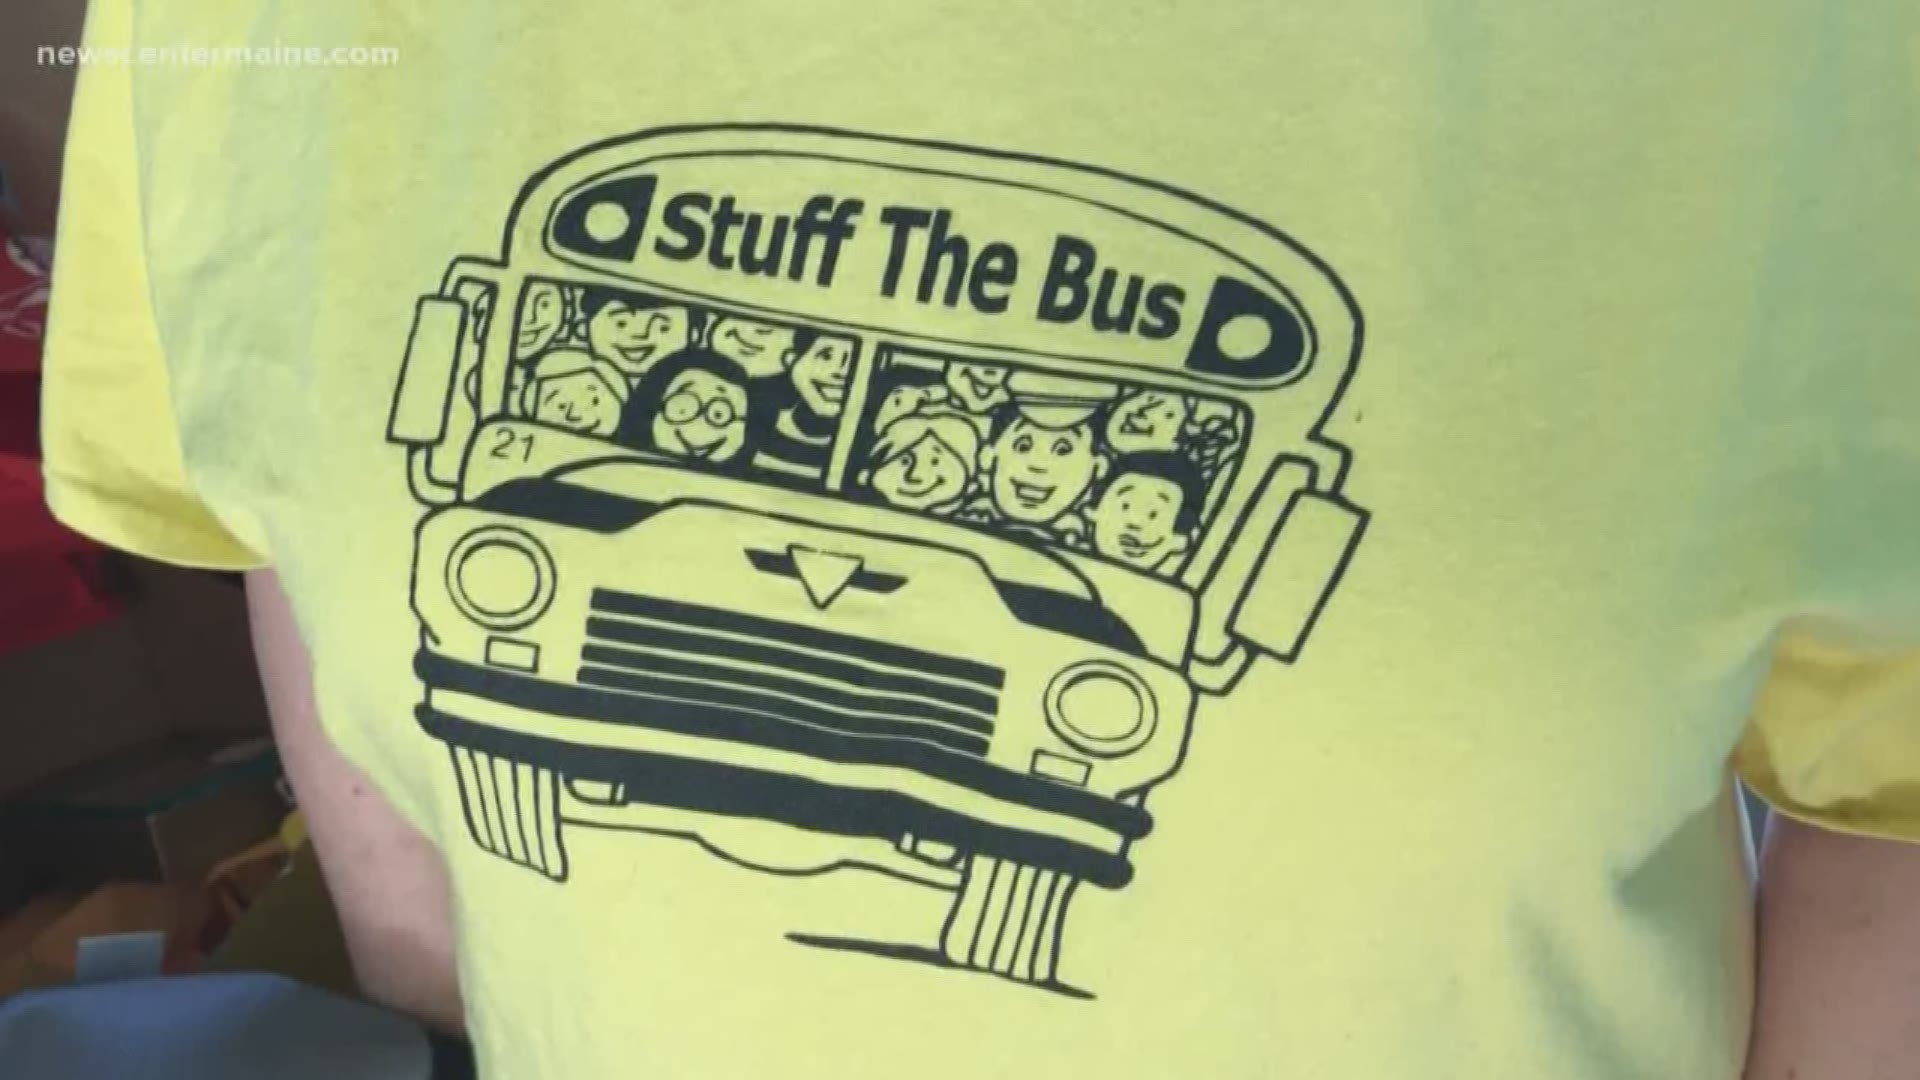 A woman from Sanford is asking for donations to help fund a new Stuff the Bus storage space.